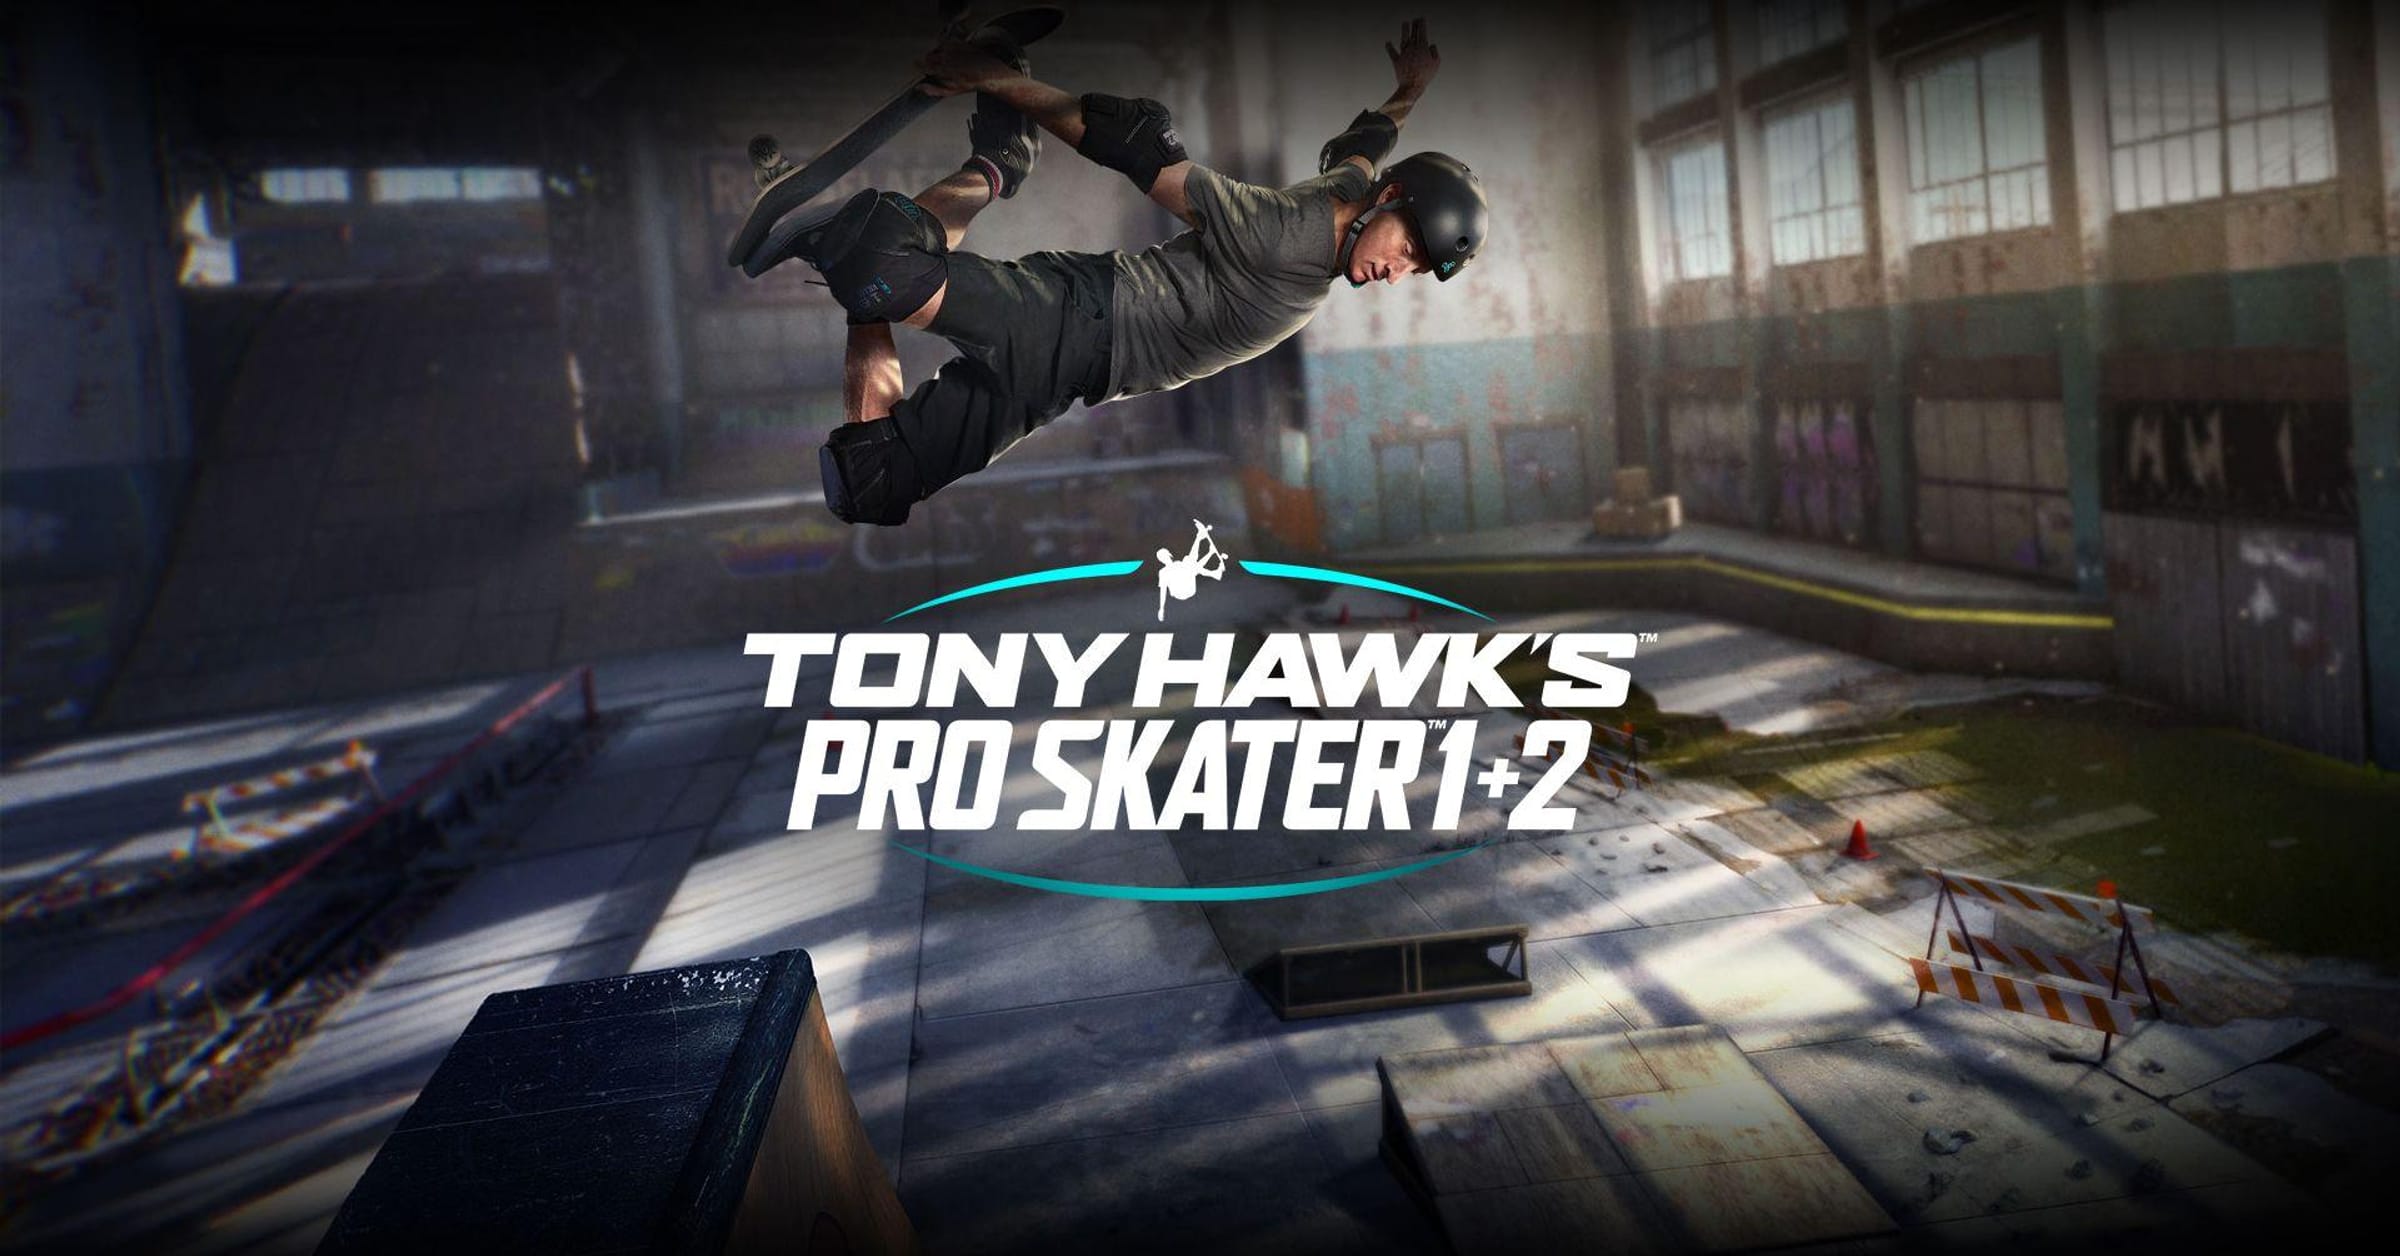 Tony Hawk's Pro Skater 1 + 2 - All The Songs From the Soundtrack